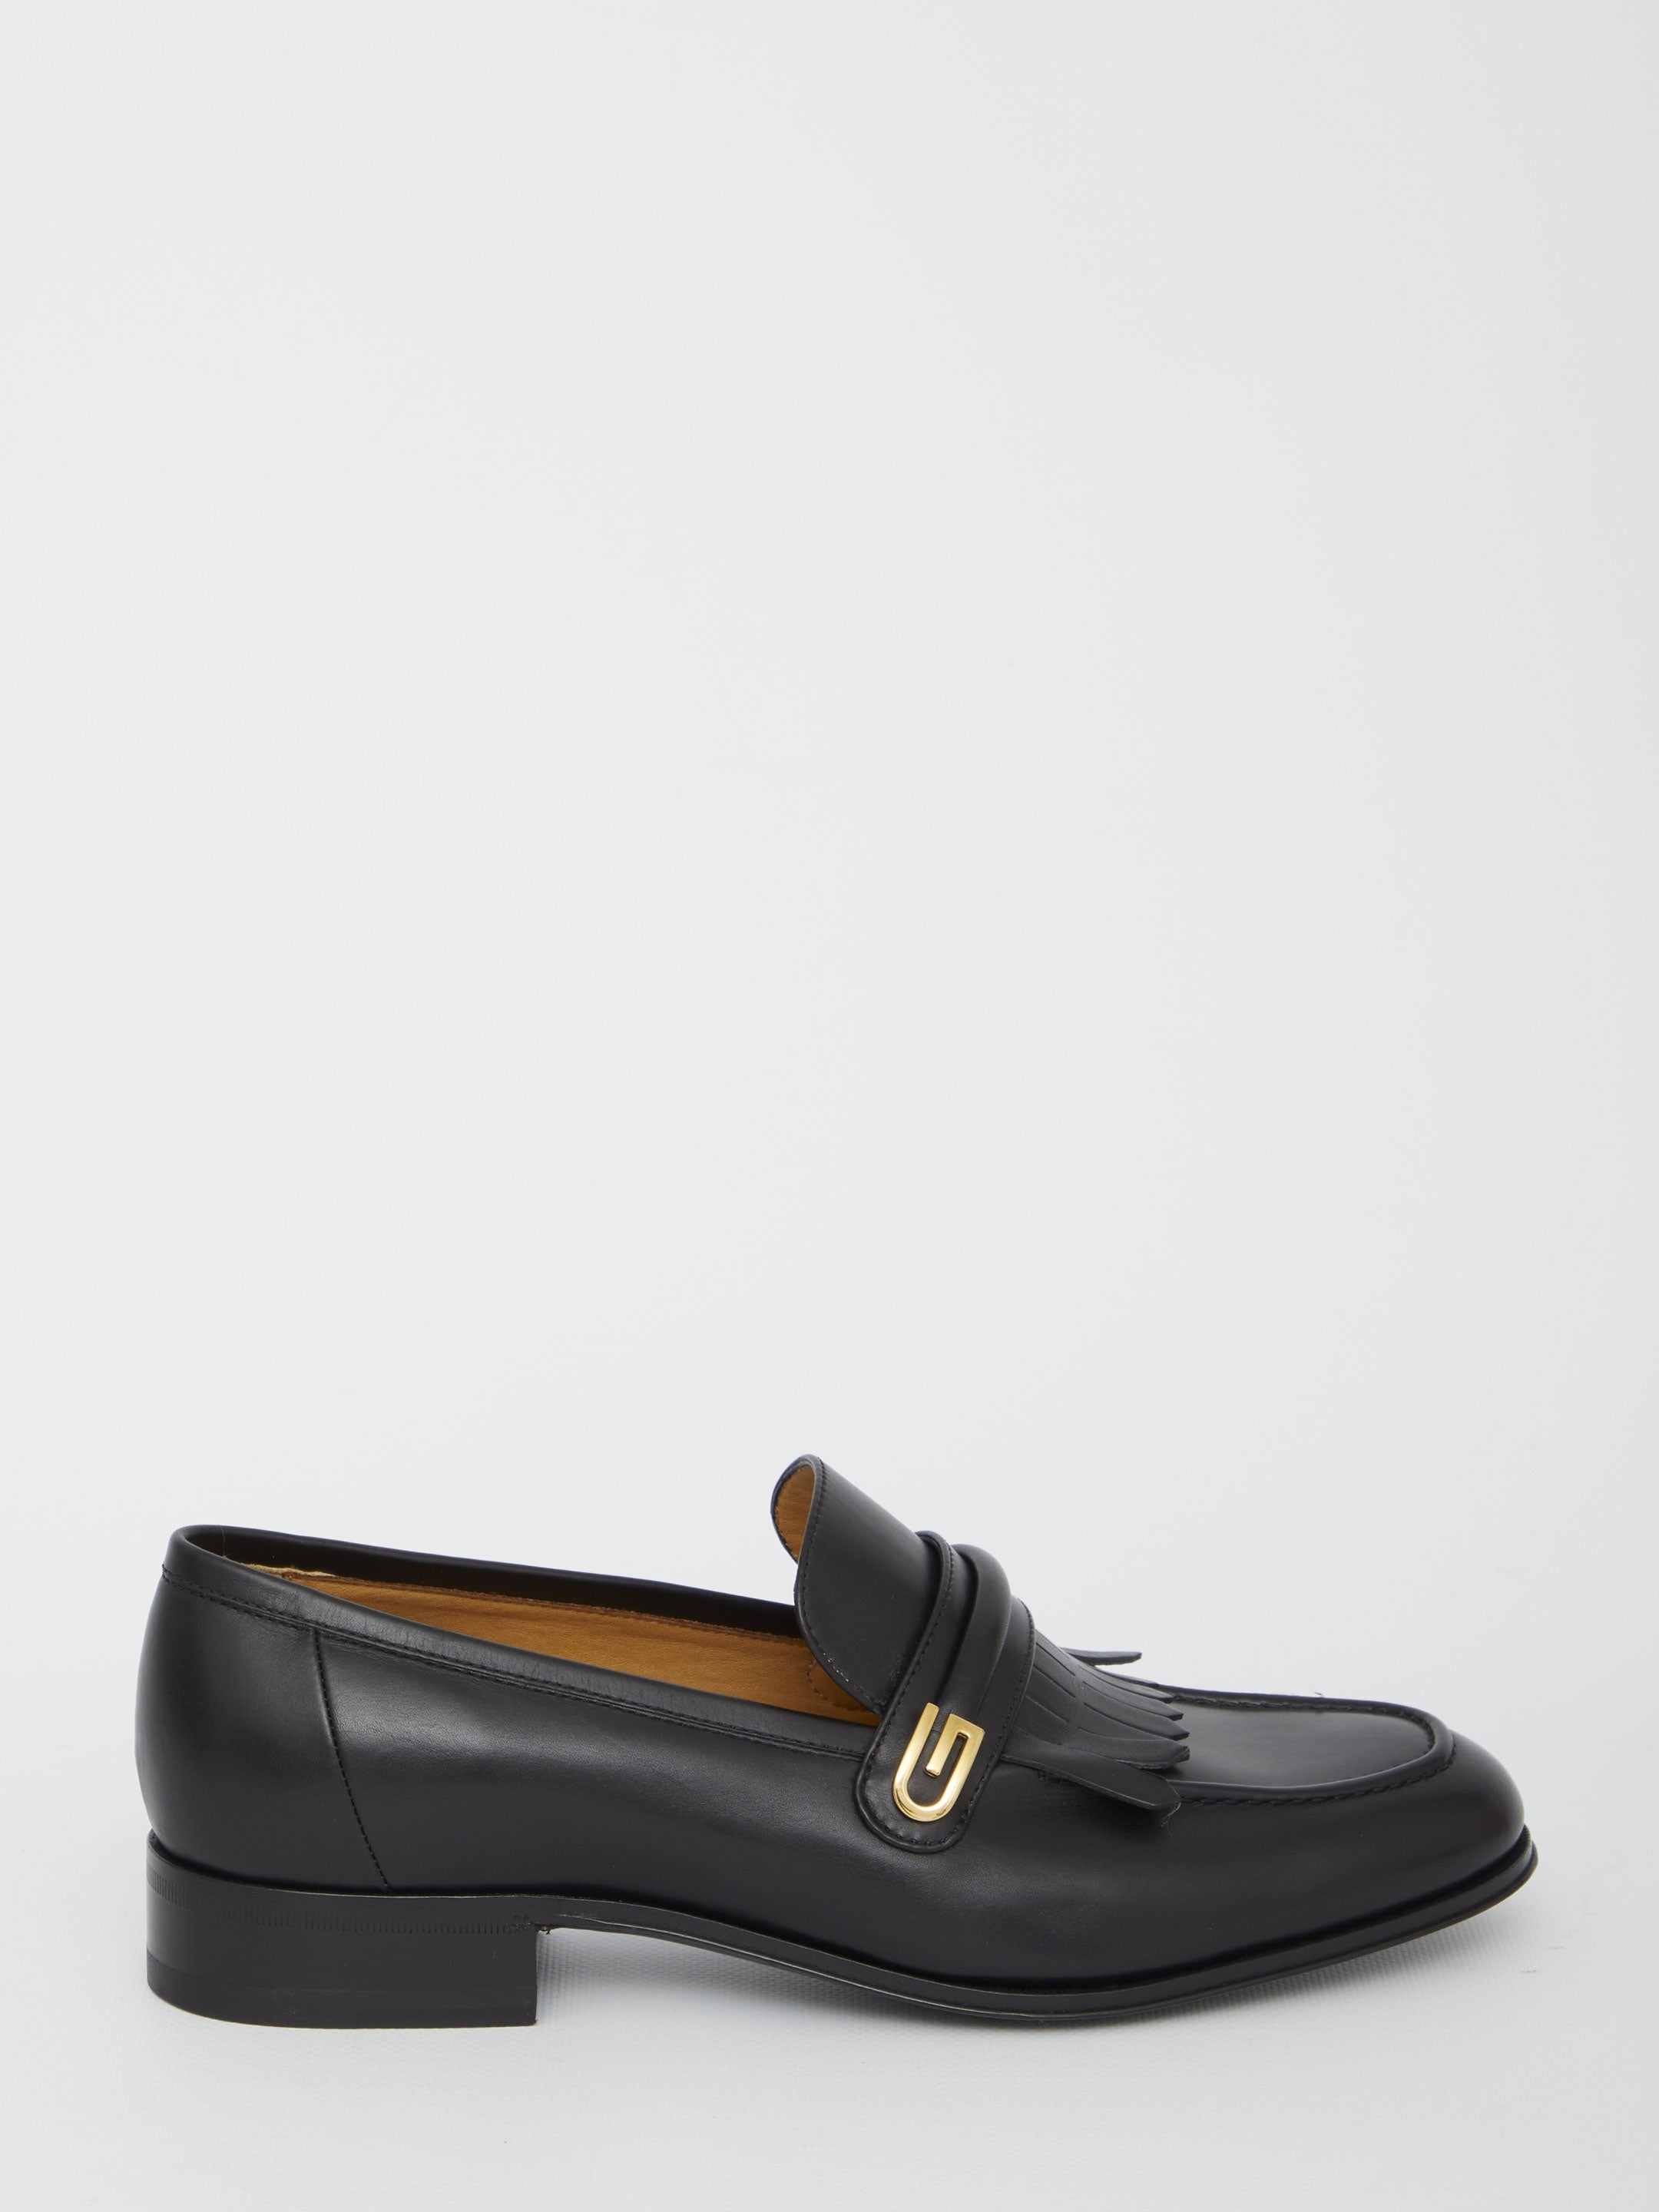 Mirrored G loafers